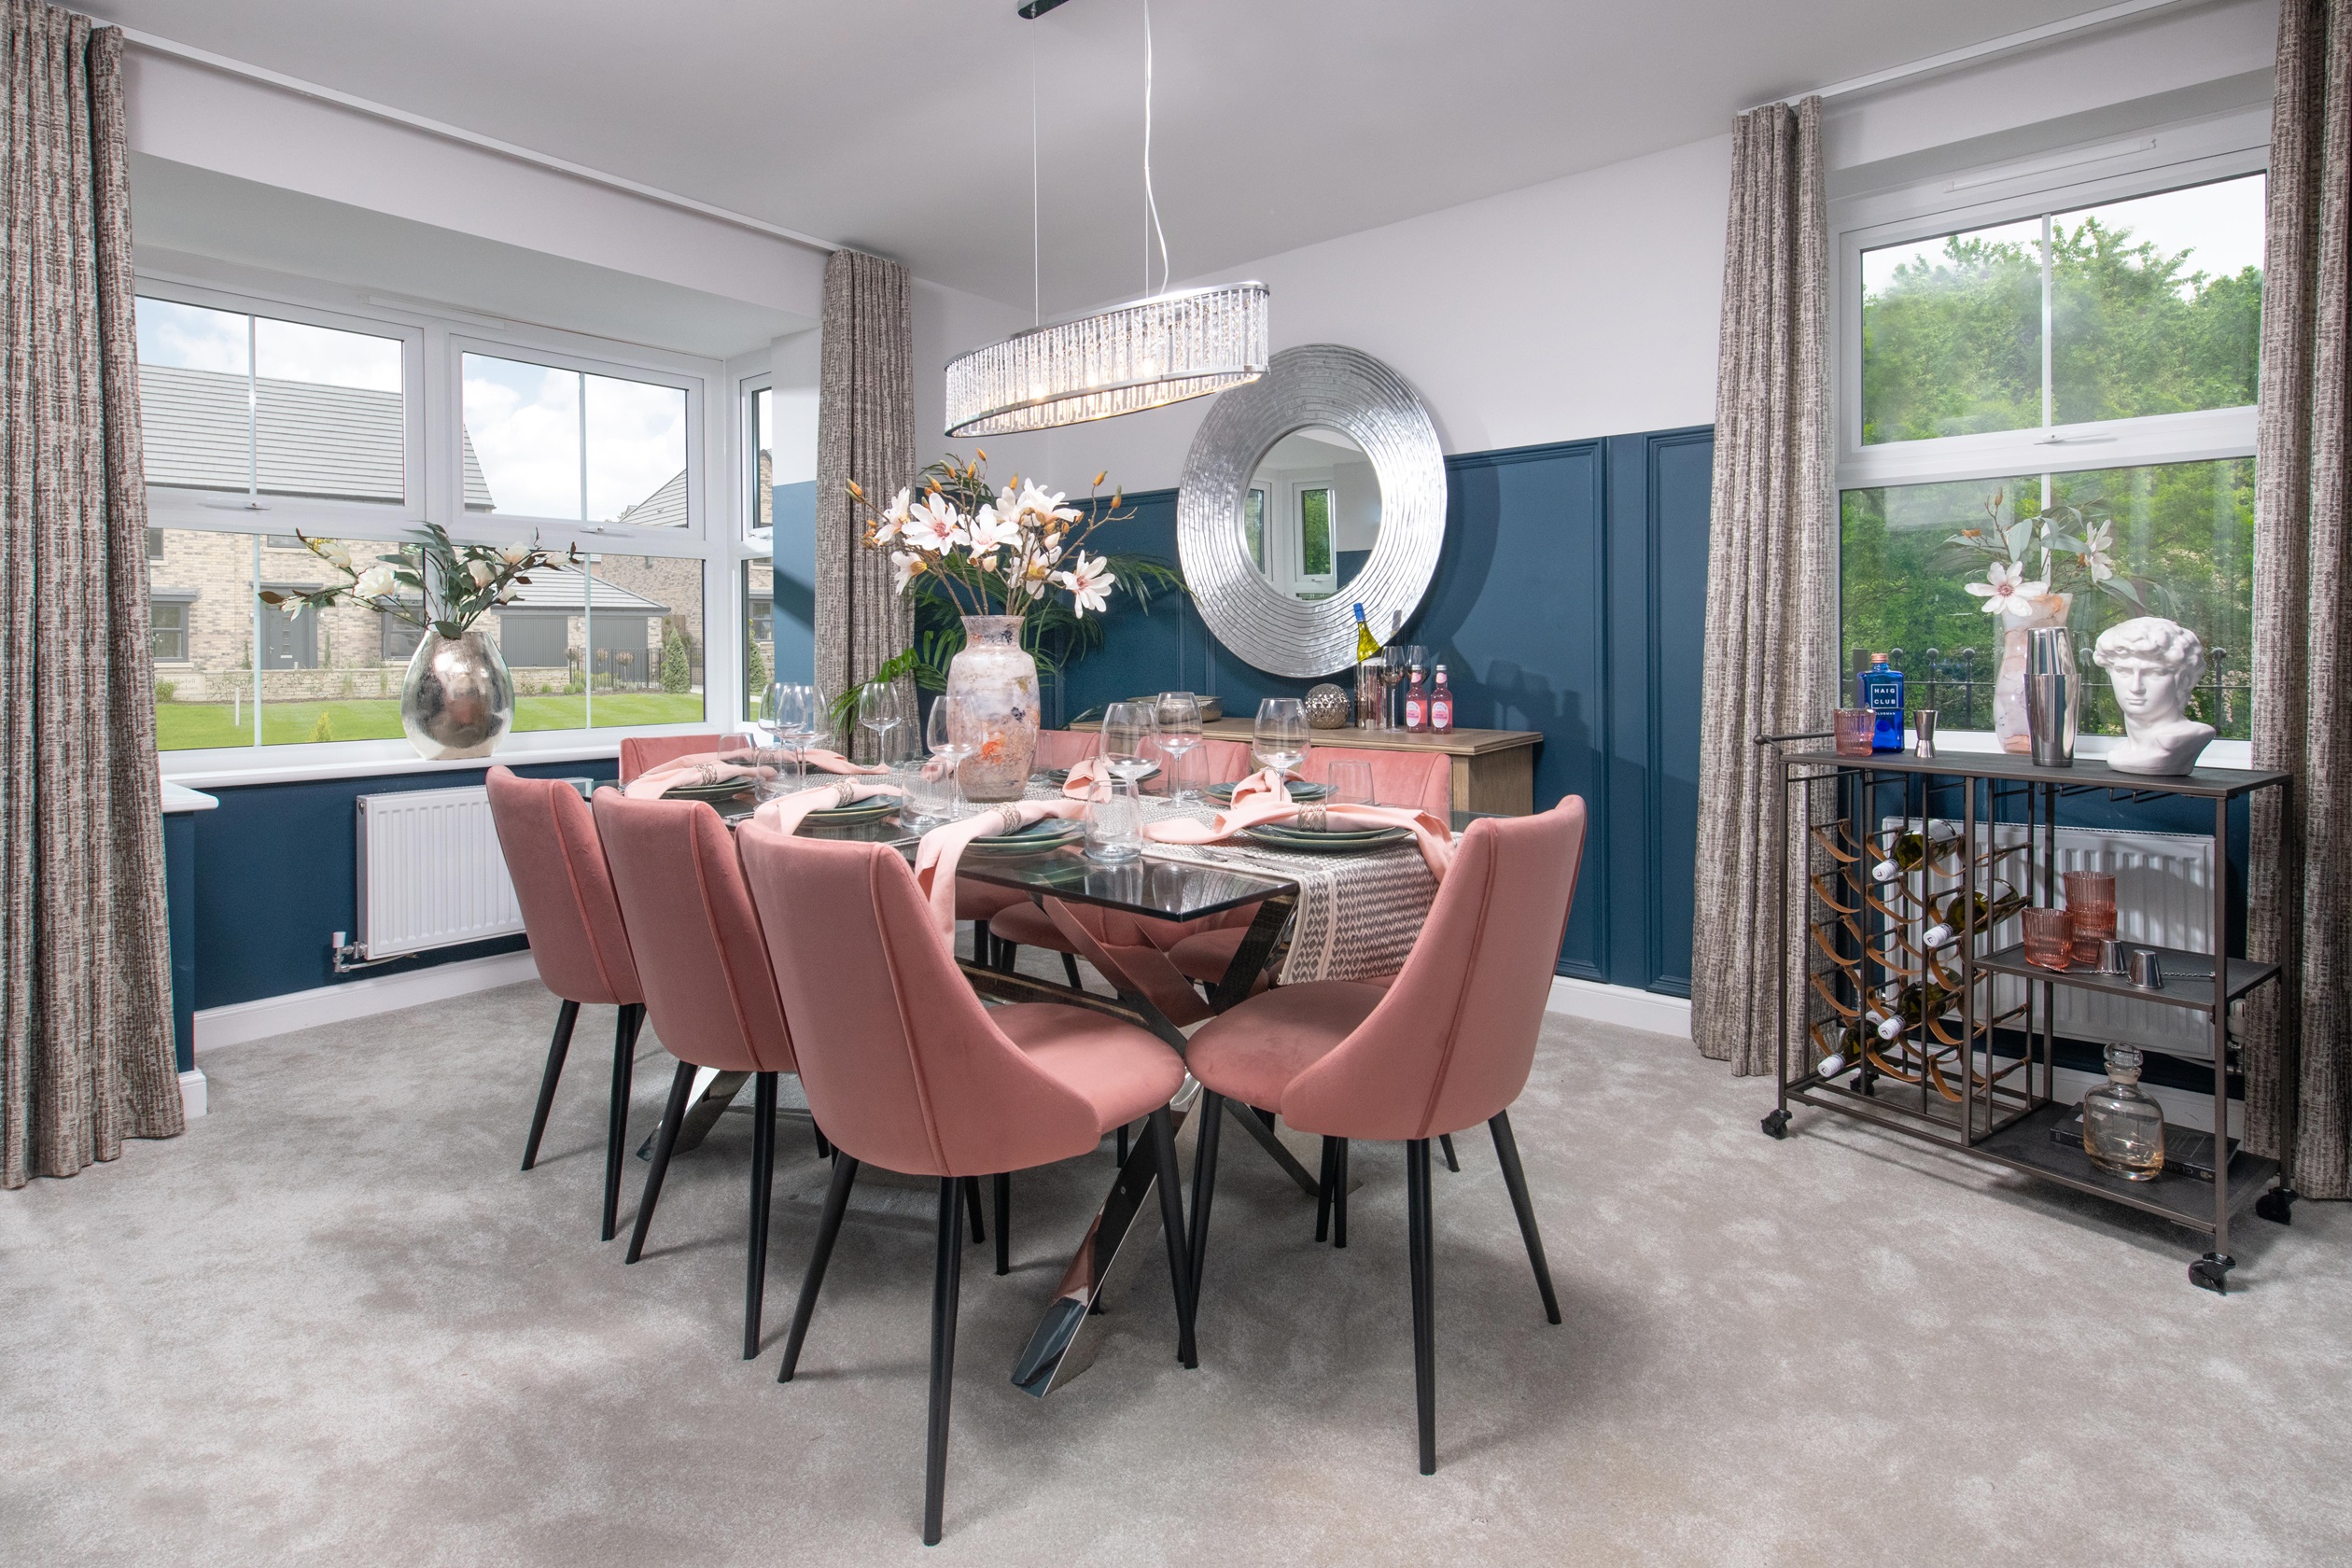 Property 3 of 10. Bluebell Meadow Sh Henley Dining